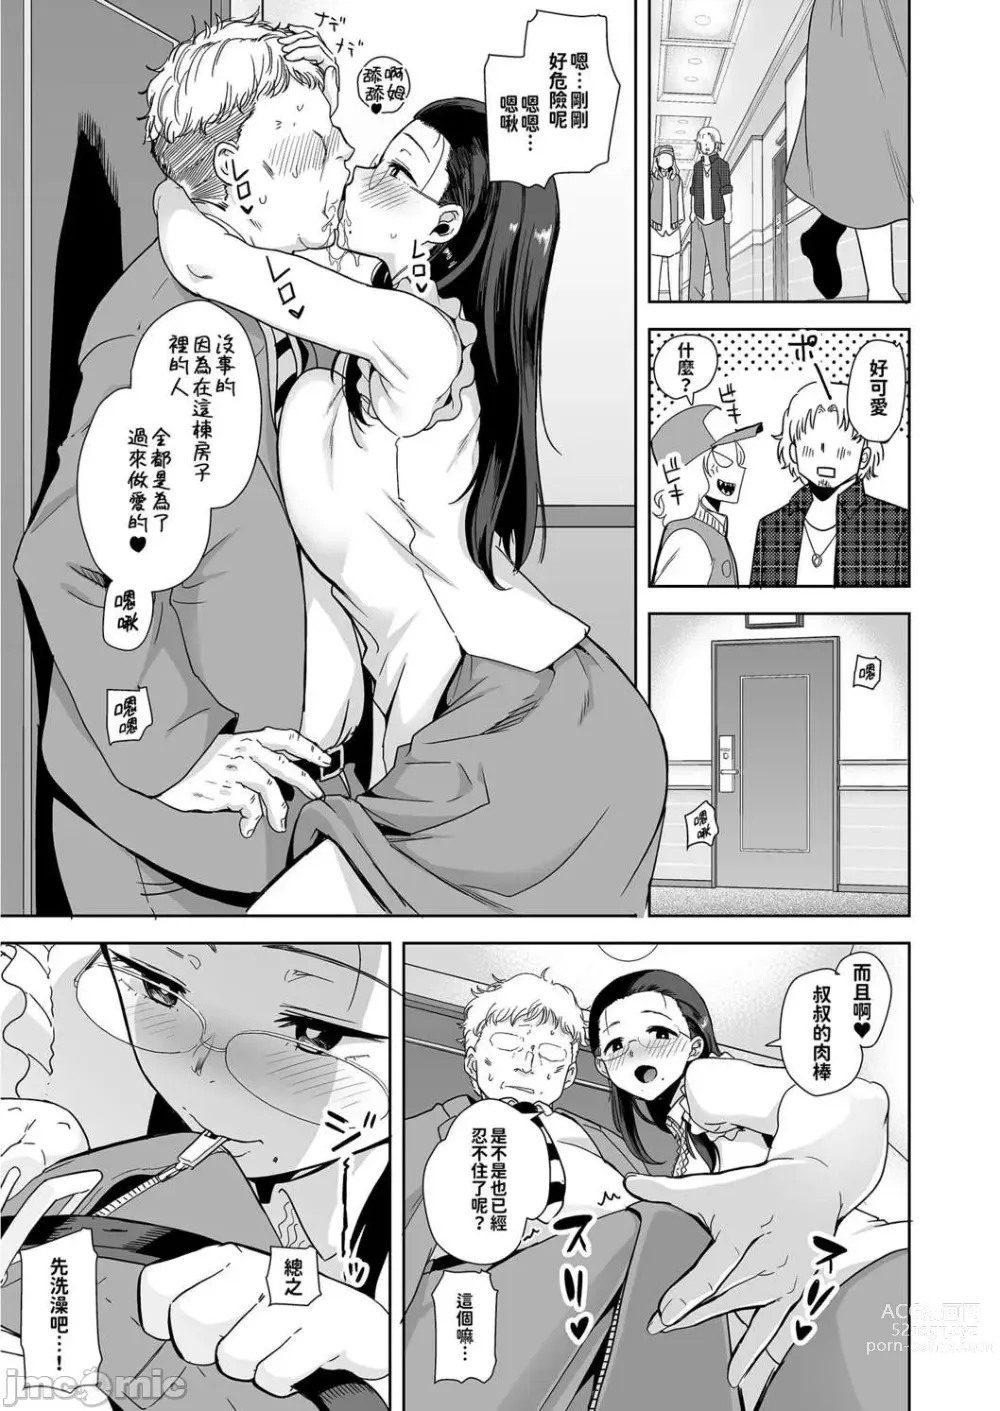 Page 8 of doujinshi 聖華女学院高等部公認竿おじさん 1-6